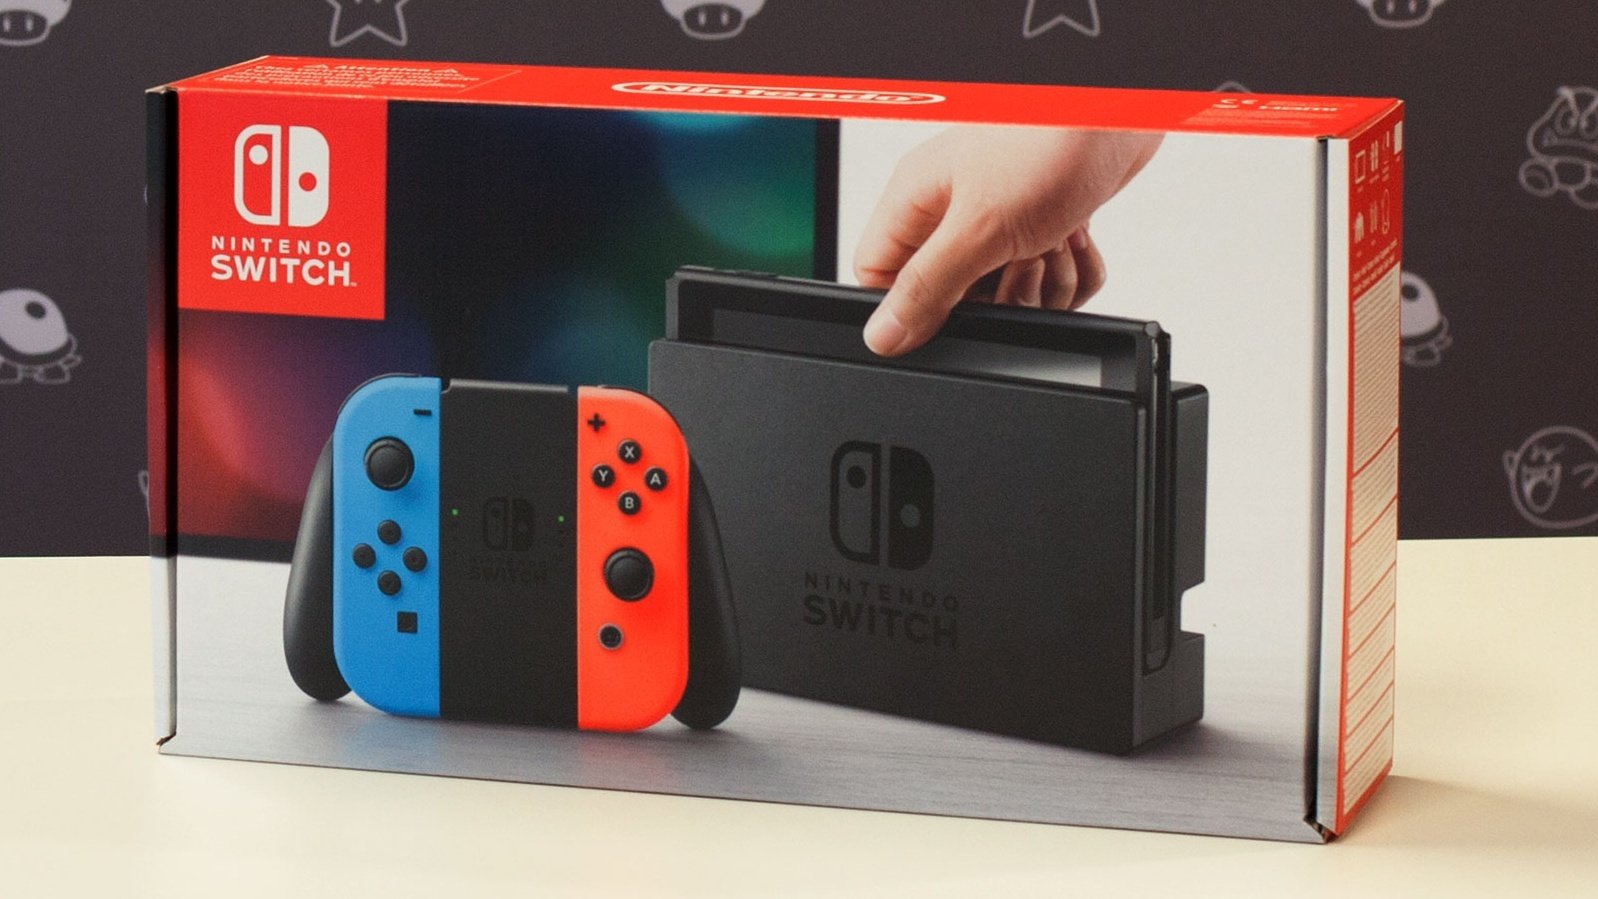 Nintendo Switch Has Now Shifted 34.74 Million Units Worldwide, Sales Up